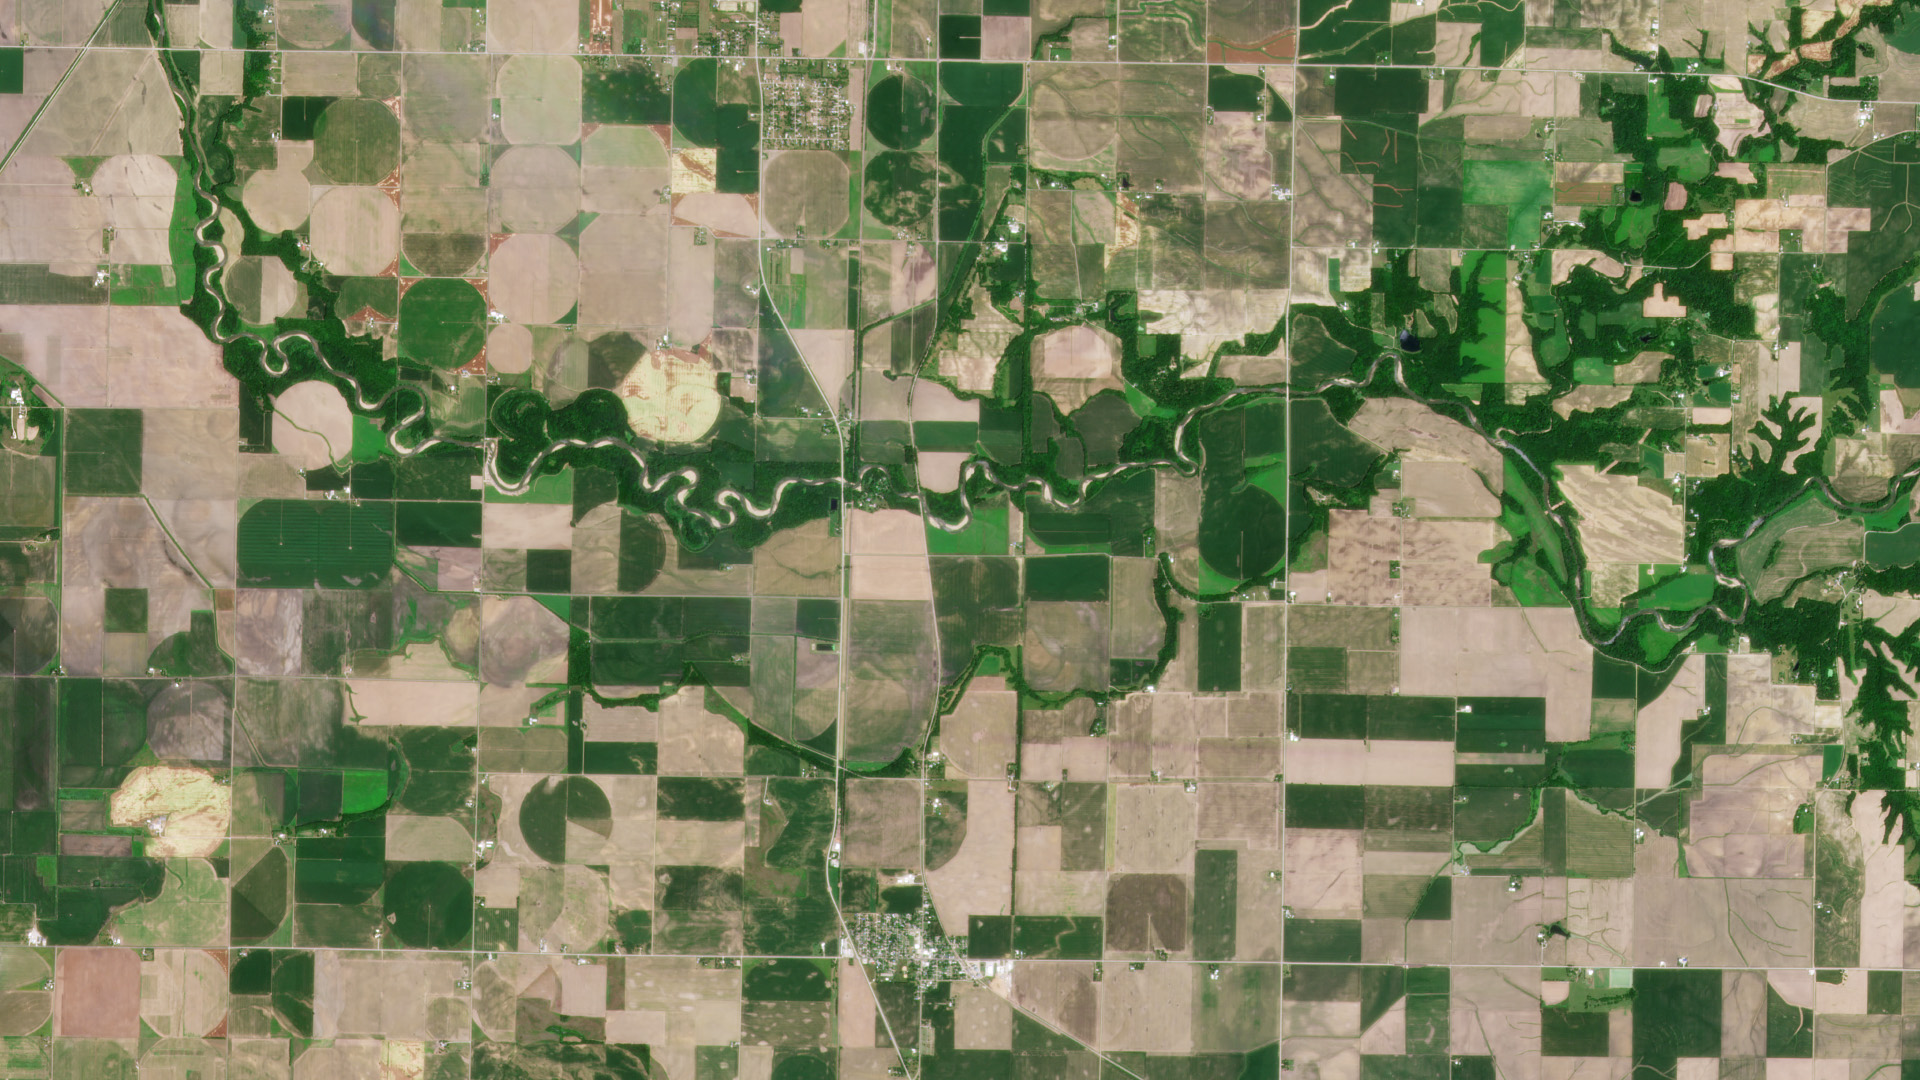 Satellite map showing farmland in Tazewell County IL. Image courtesy or Planet-Labs.